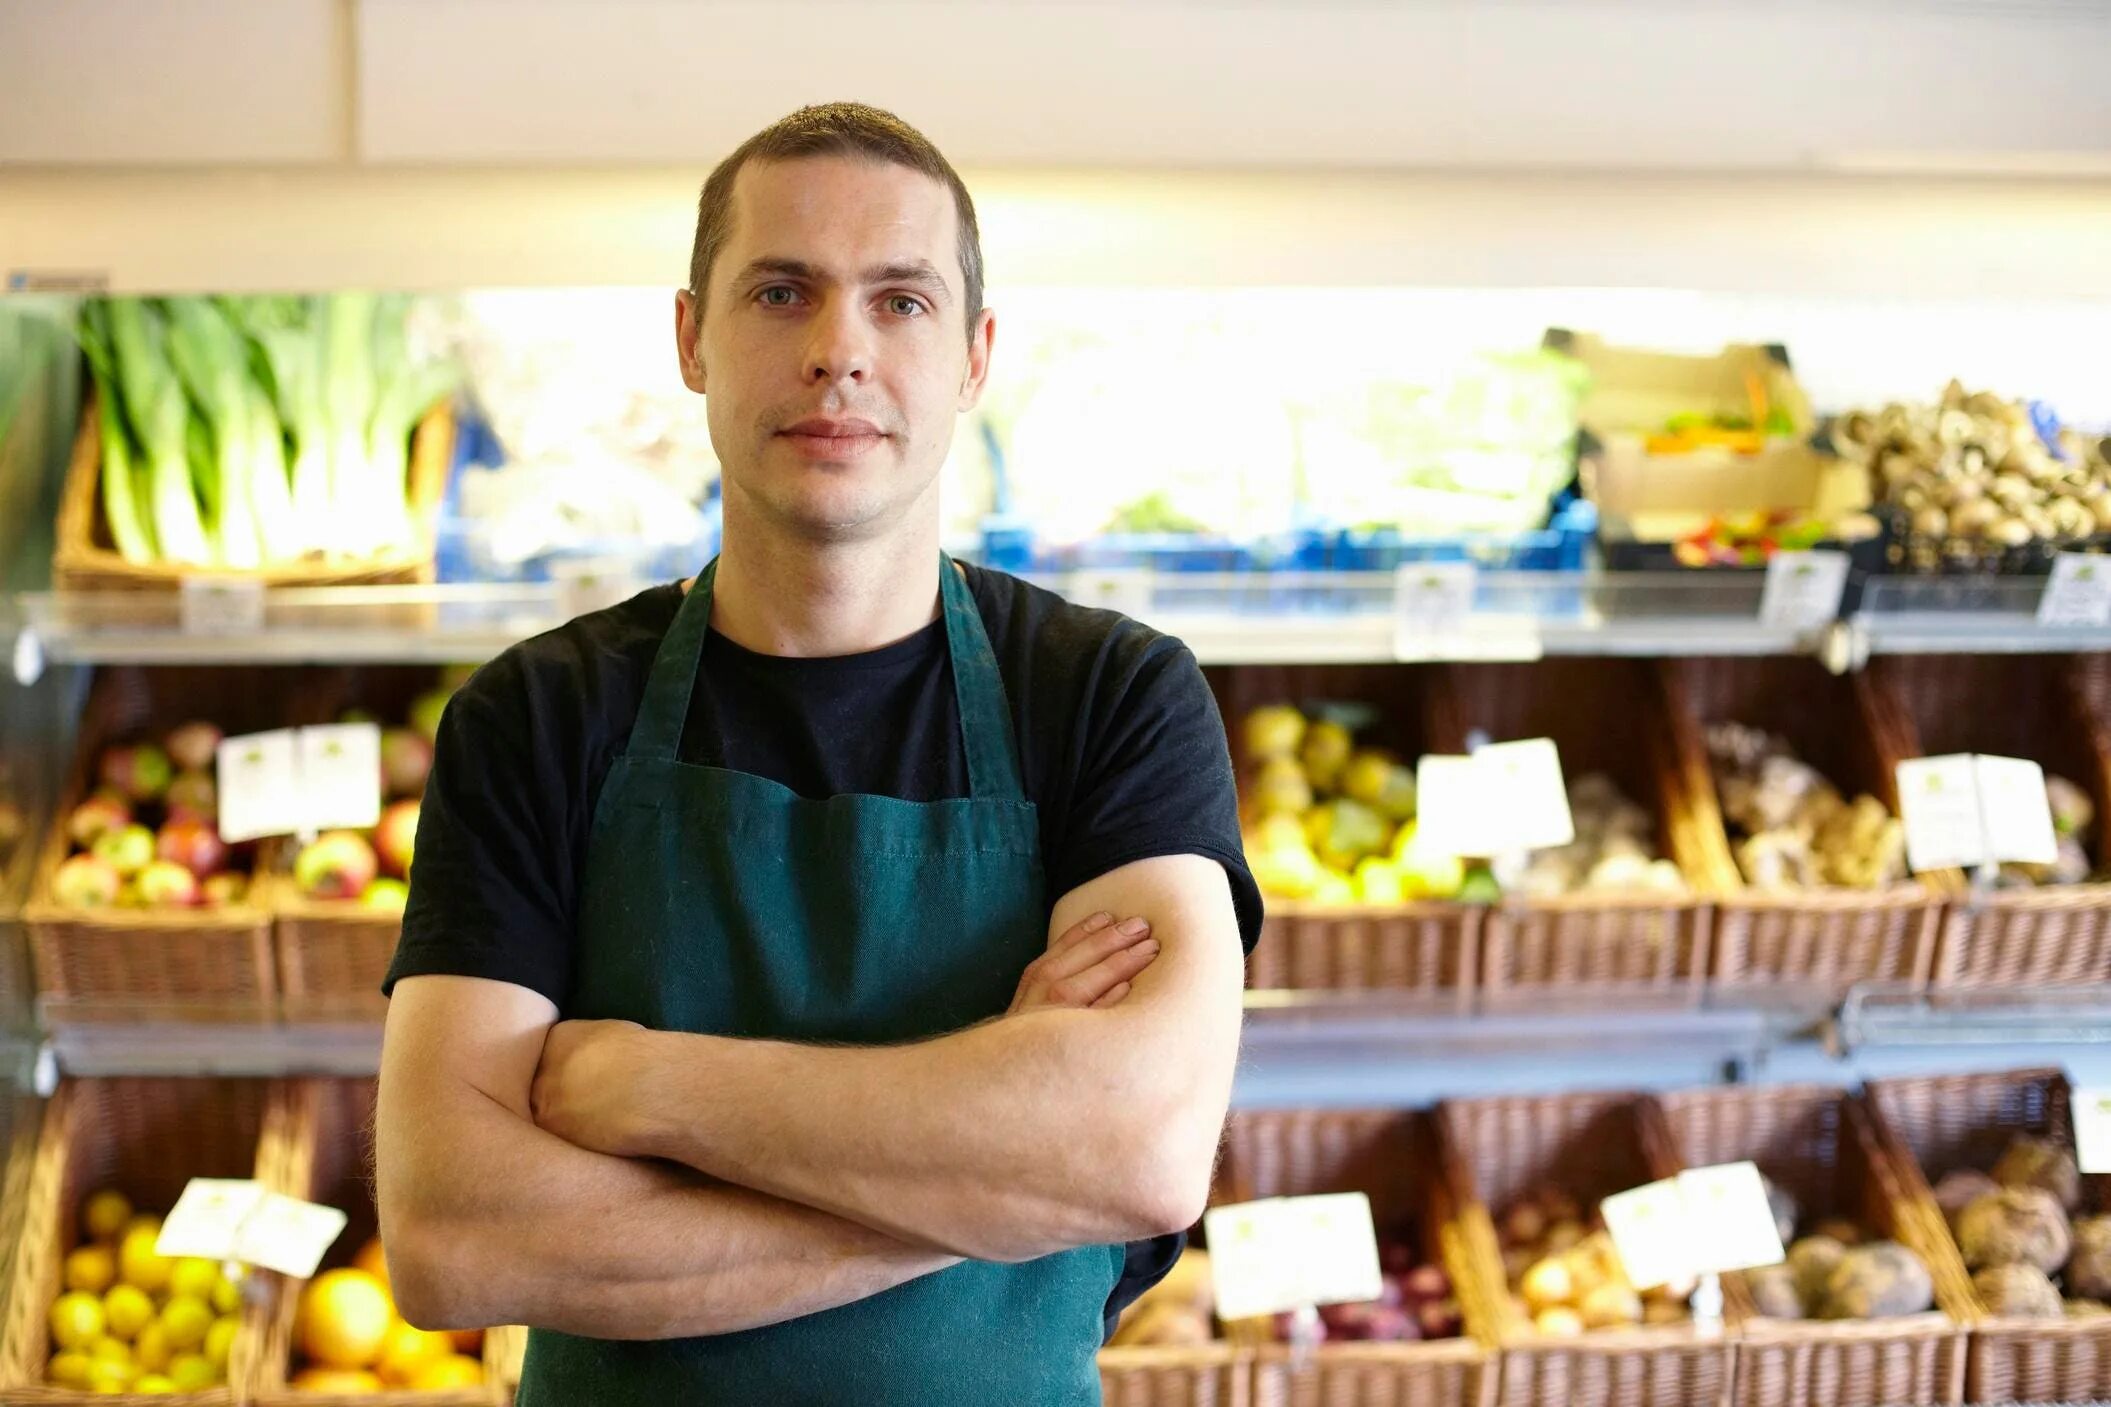 He work in a shop. Greengrocer. Greengrocer уровни. Grocers greengrocers. Shop worker.